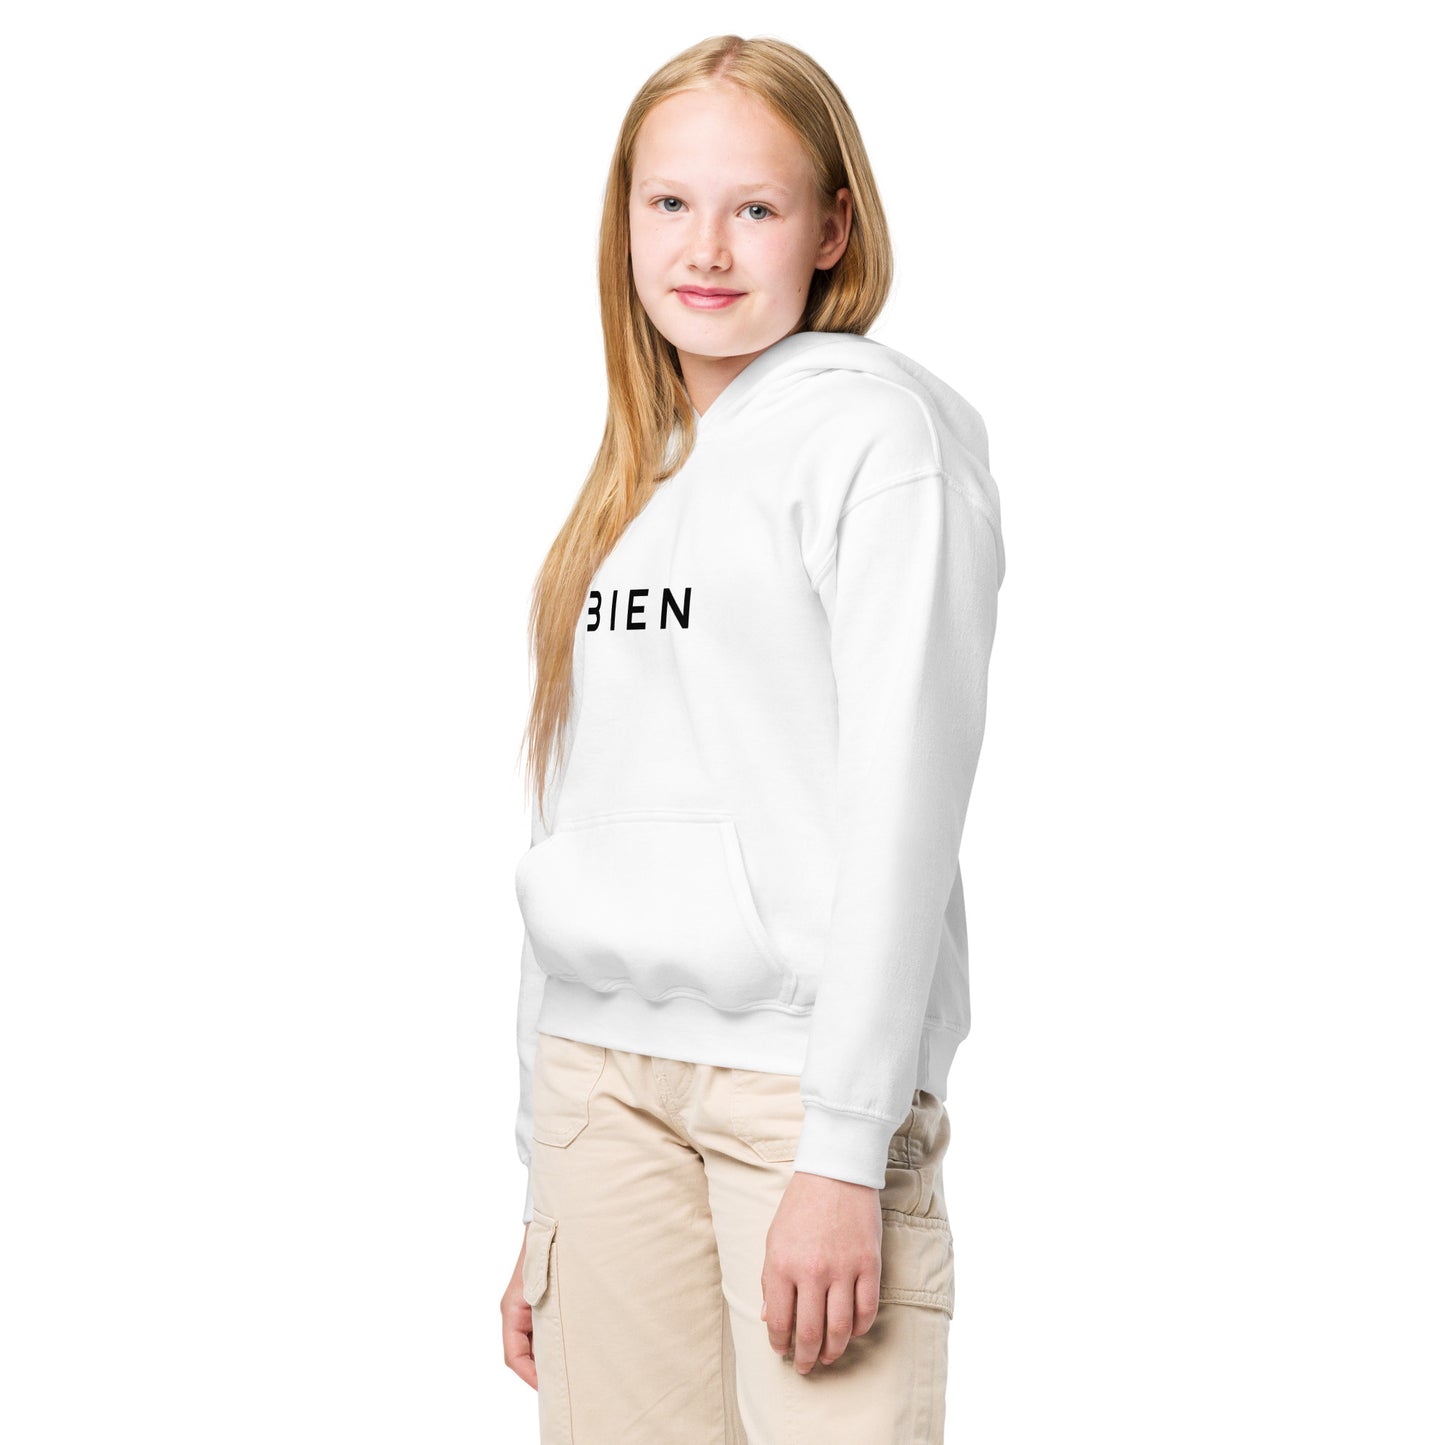 Youth Hoodies for Girls